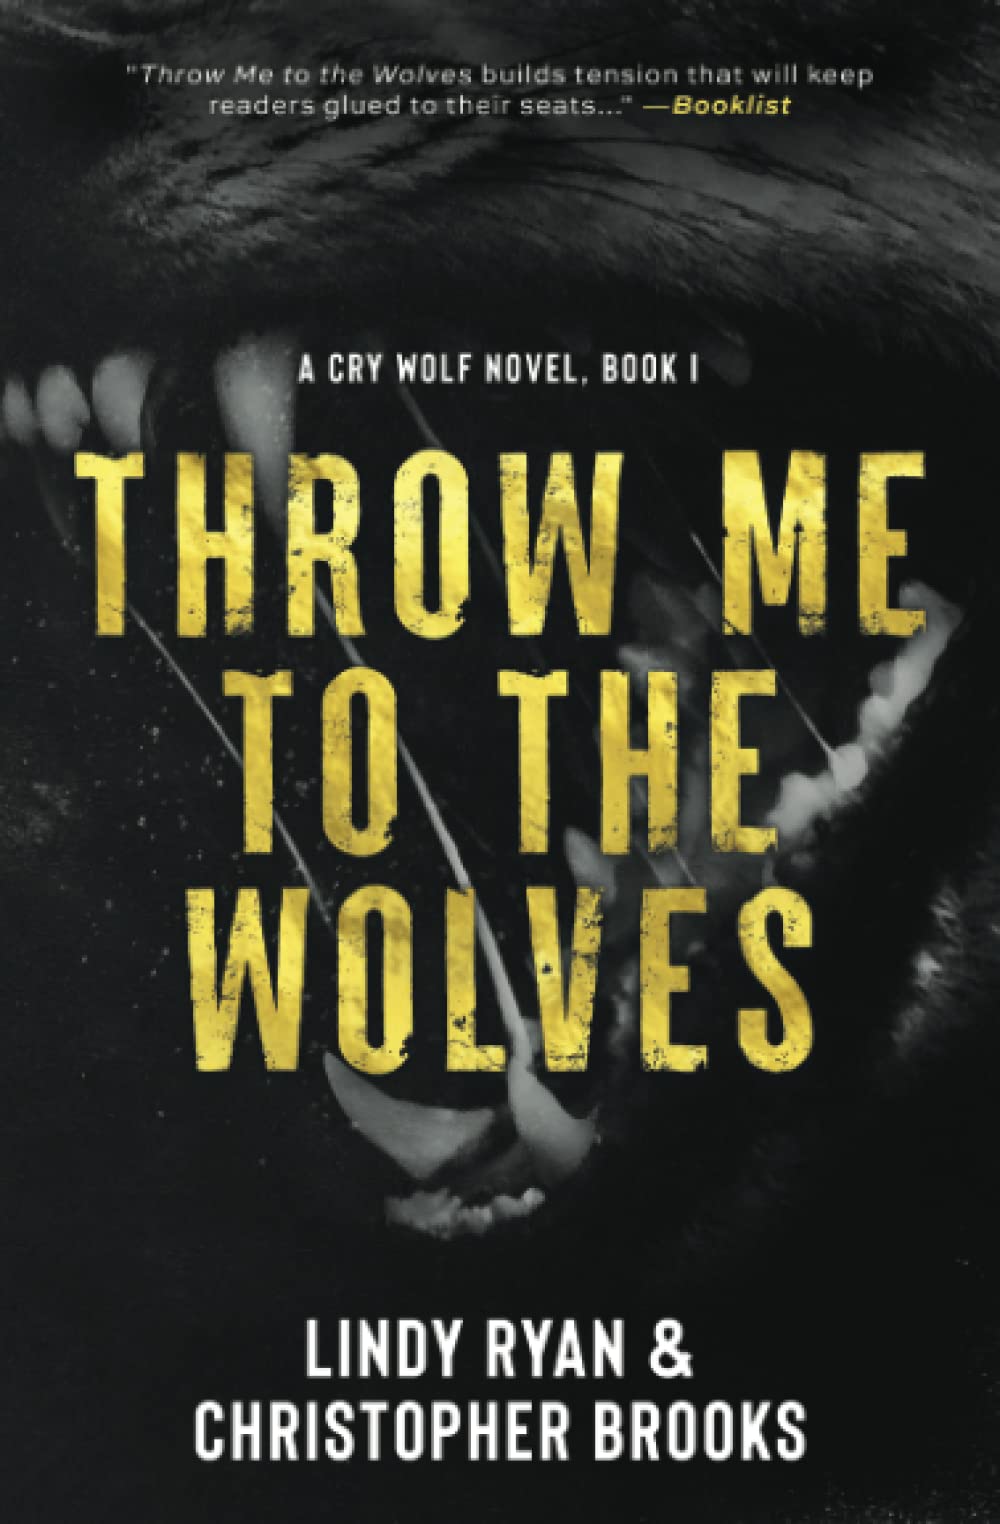 Throw Me to the Wolves by Lindy Ryan